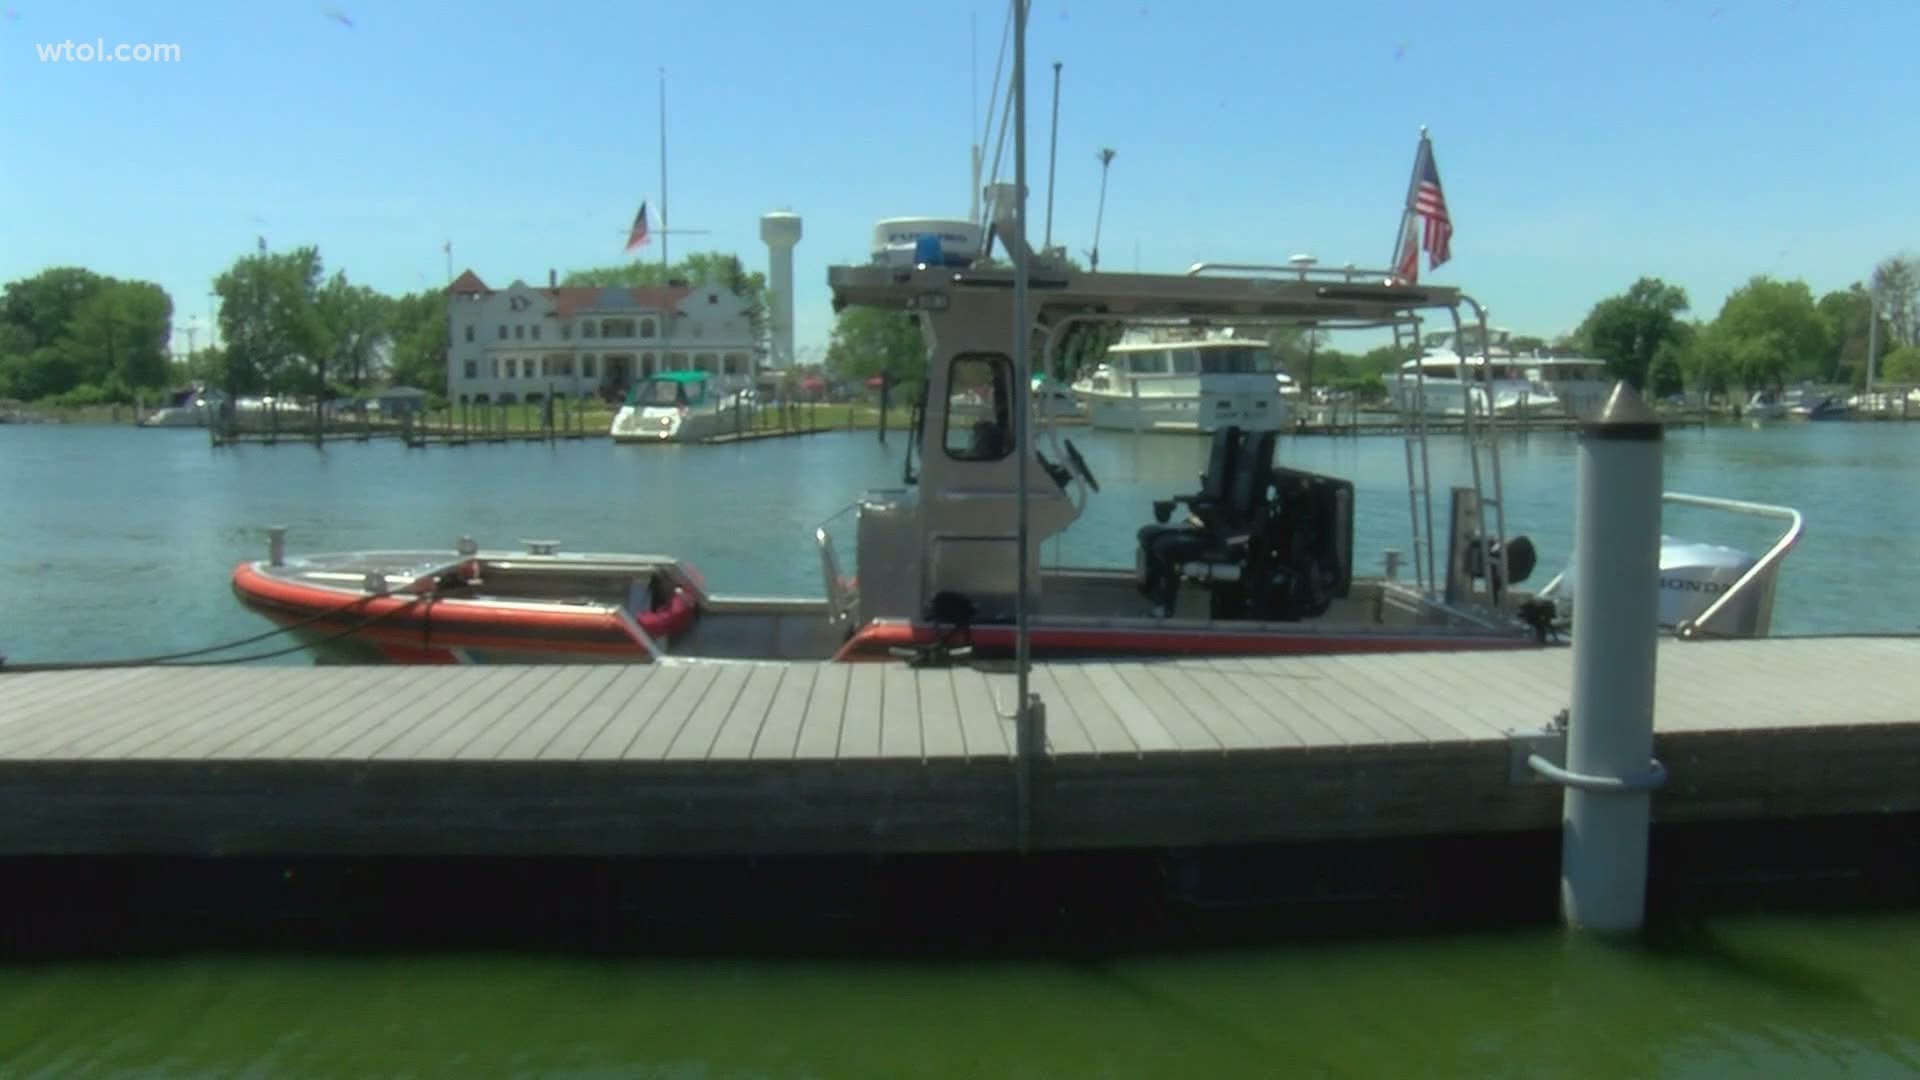 Just last year U.S Coast Guard had to take 560 impaired boaters off the waterways nationwide